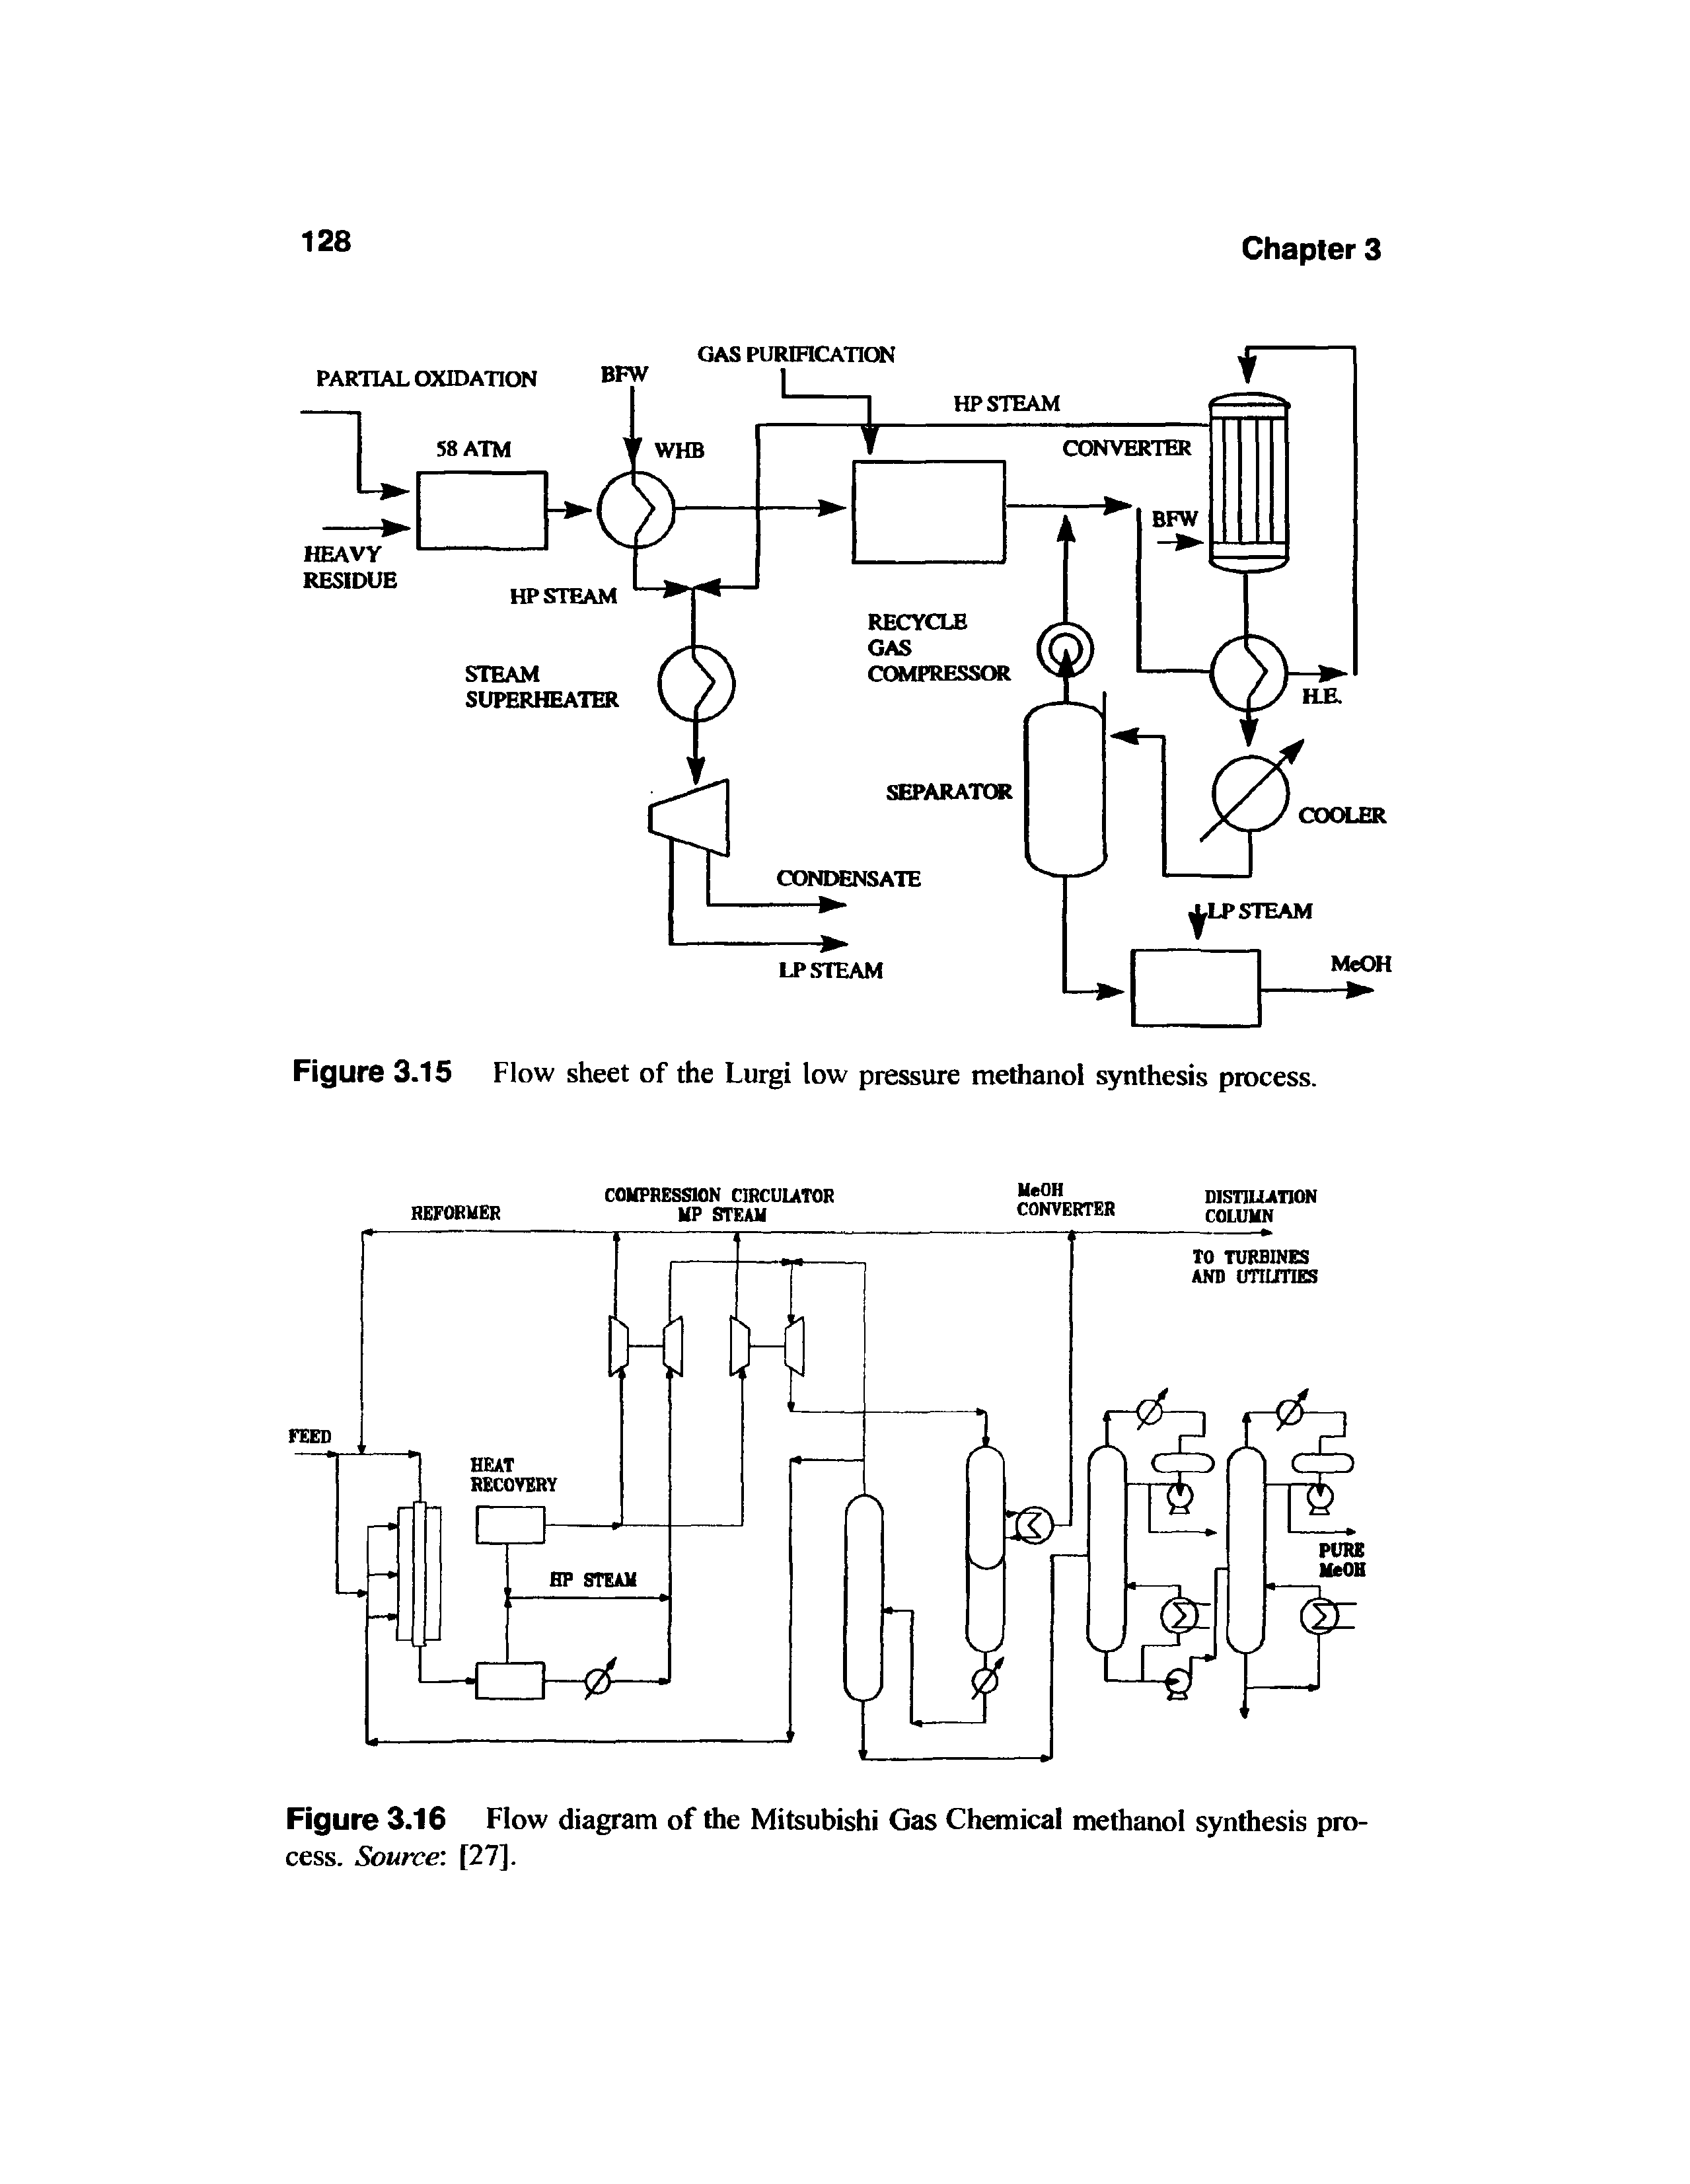 Figure 3.16 Flow diagram of the Mitsubishi Gas Chemical methanol synthesis process. Source [27].